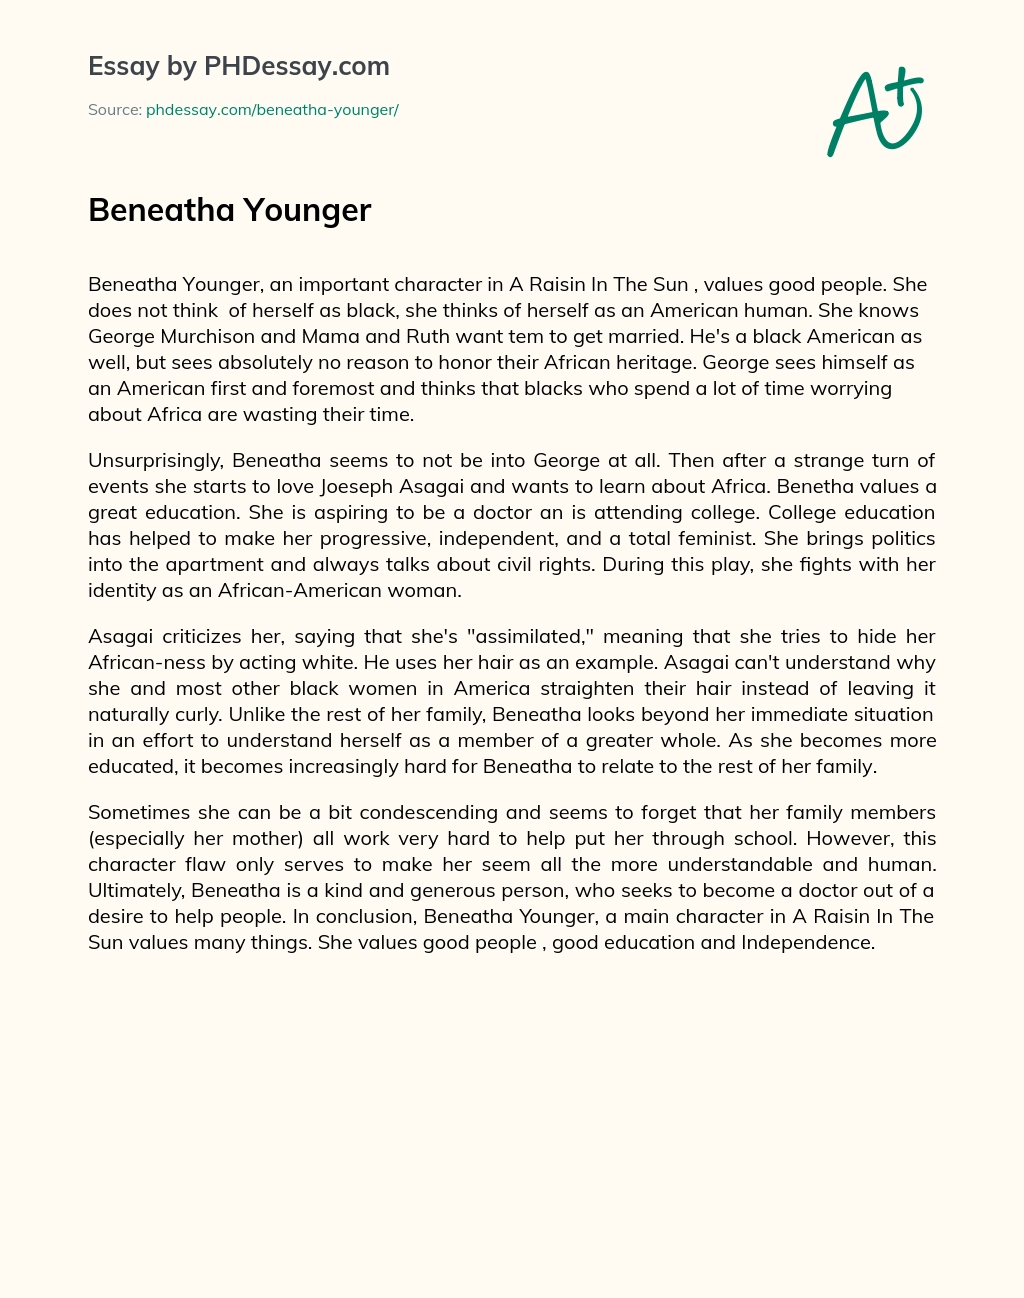 Beneatha Younger essay